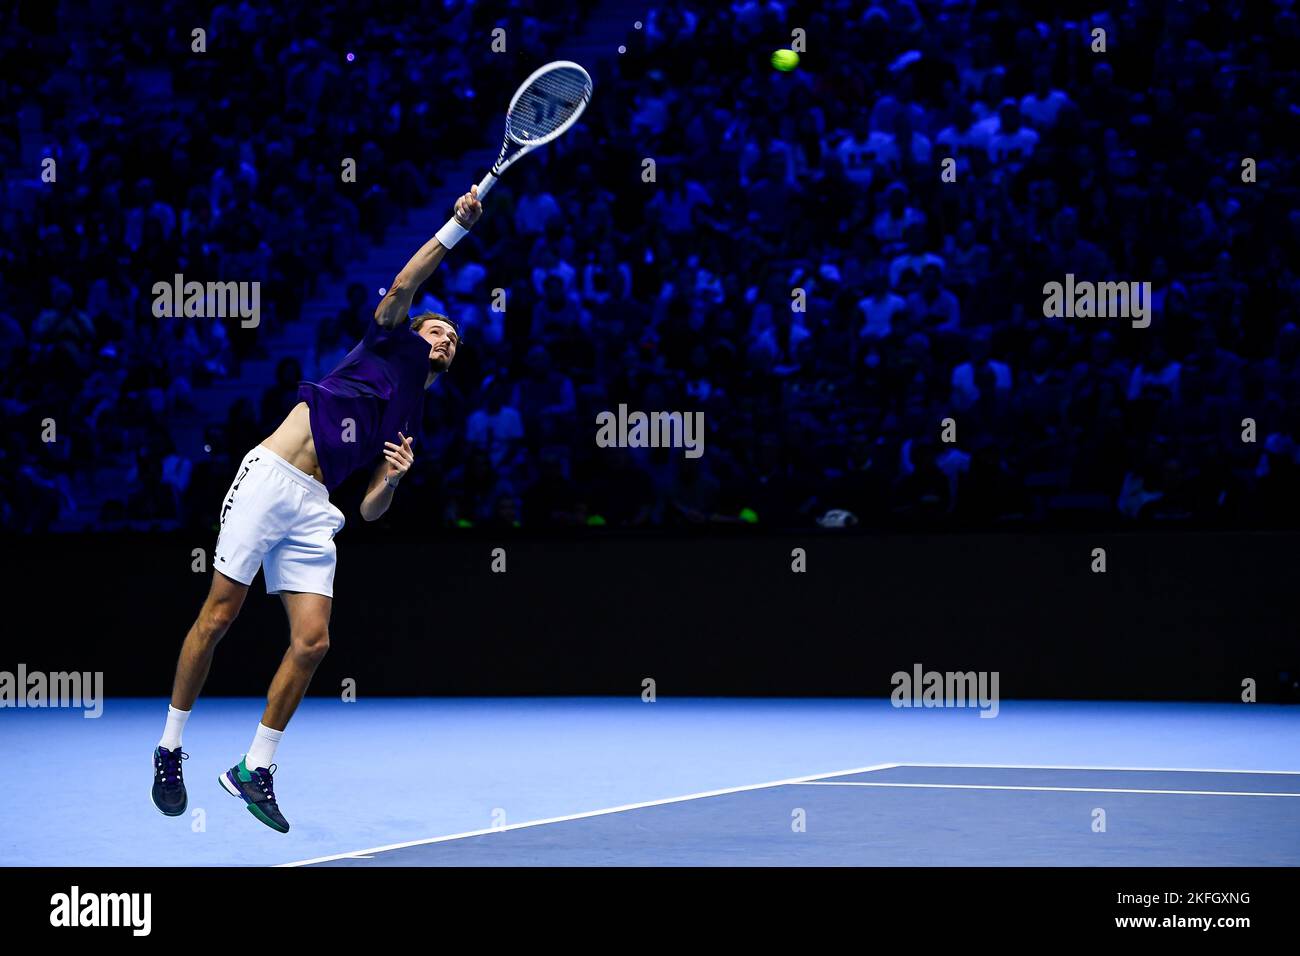 Turin, Italy. 18 November 2022. Daniil Medvedev of Russia serves during his round robin match against Novak Djokovic of Serbia during day six of the Nitto ATP Finals. Novak Djokovic won the match 6-3, 6-7(5), 7-6(2). Credit: Nicolò Campo/Alamy Live News Stock Photo